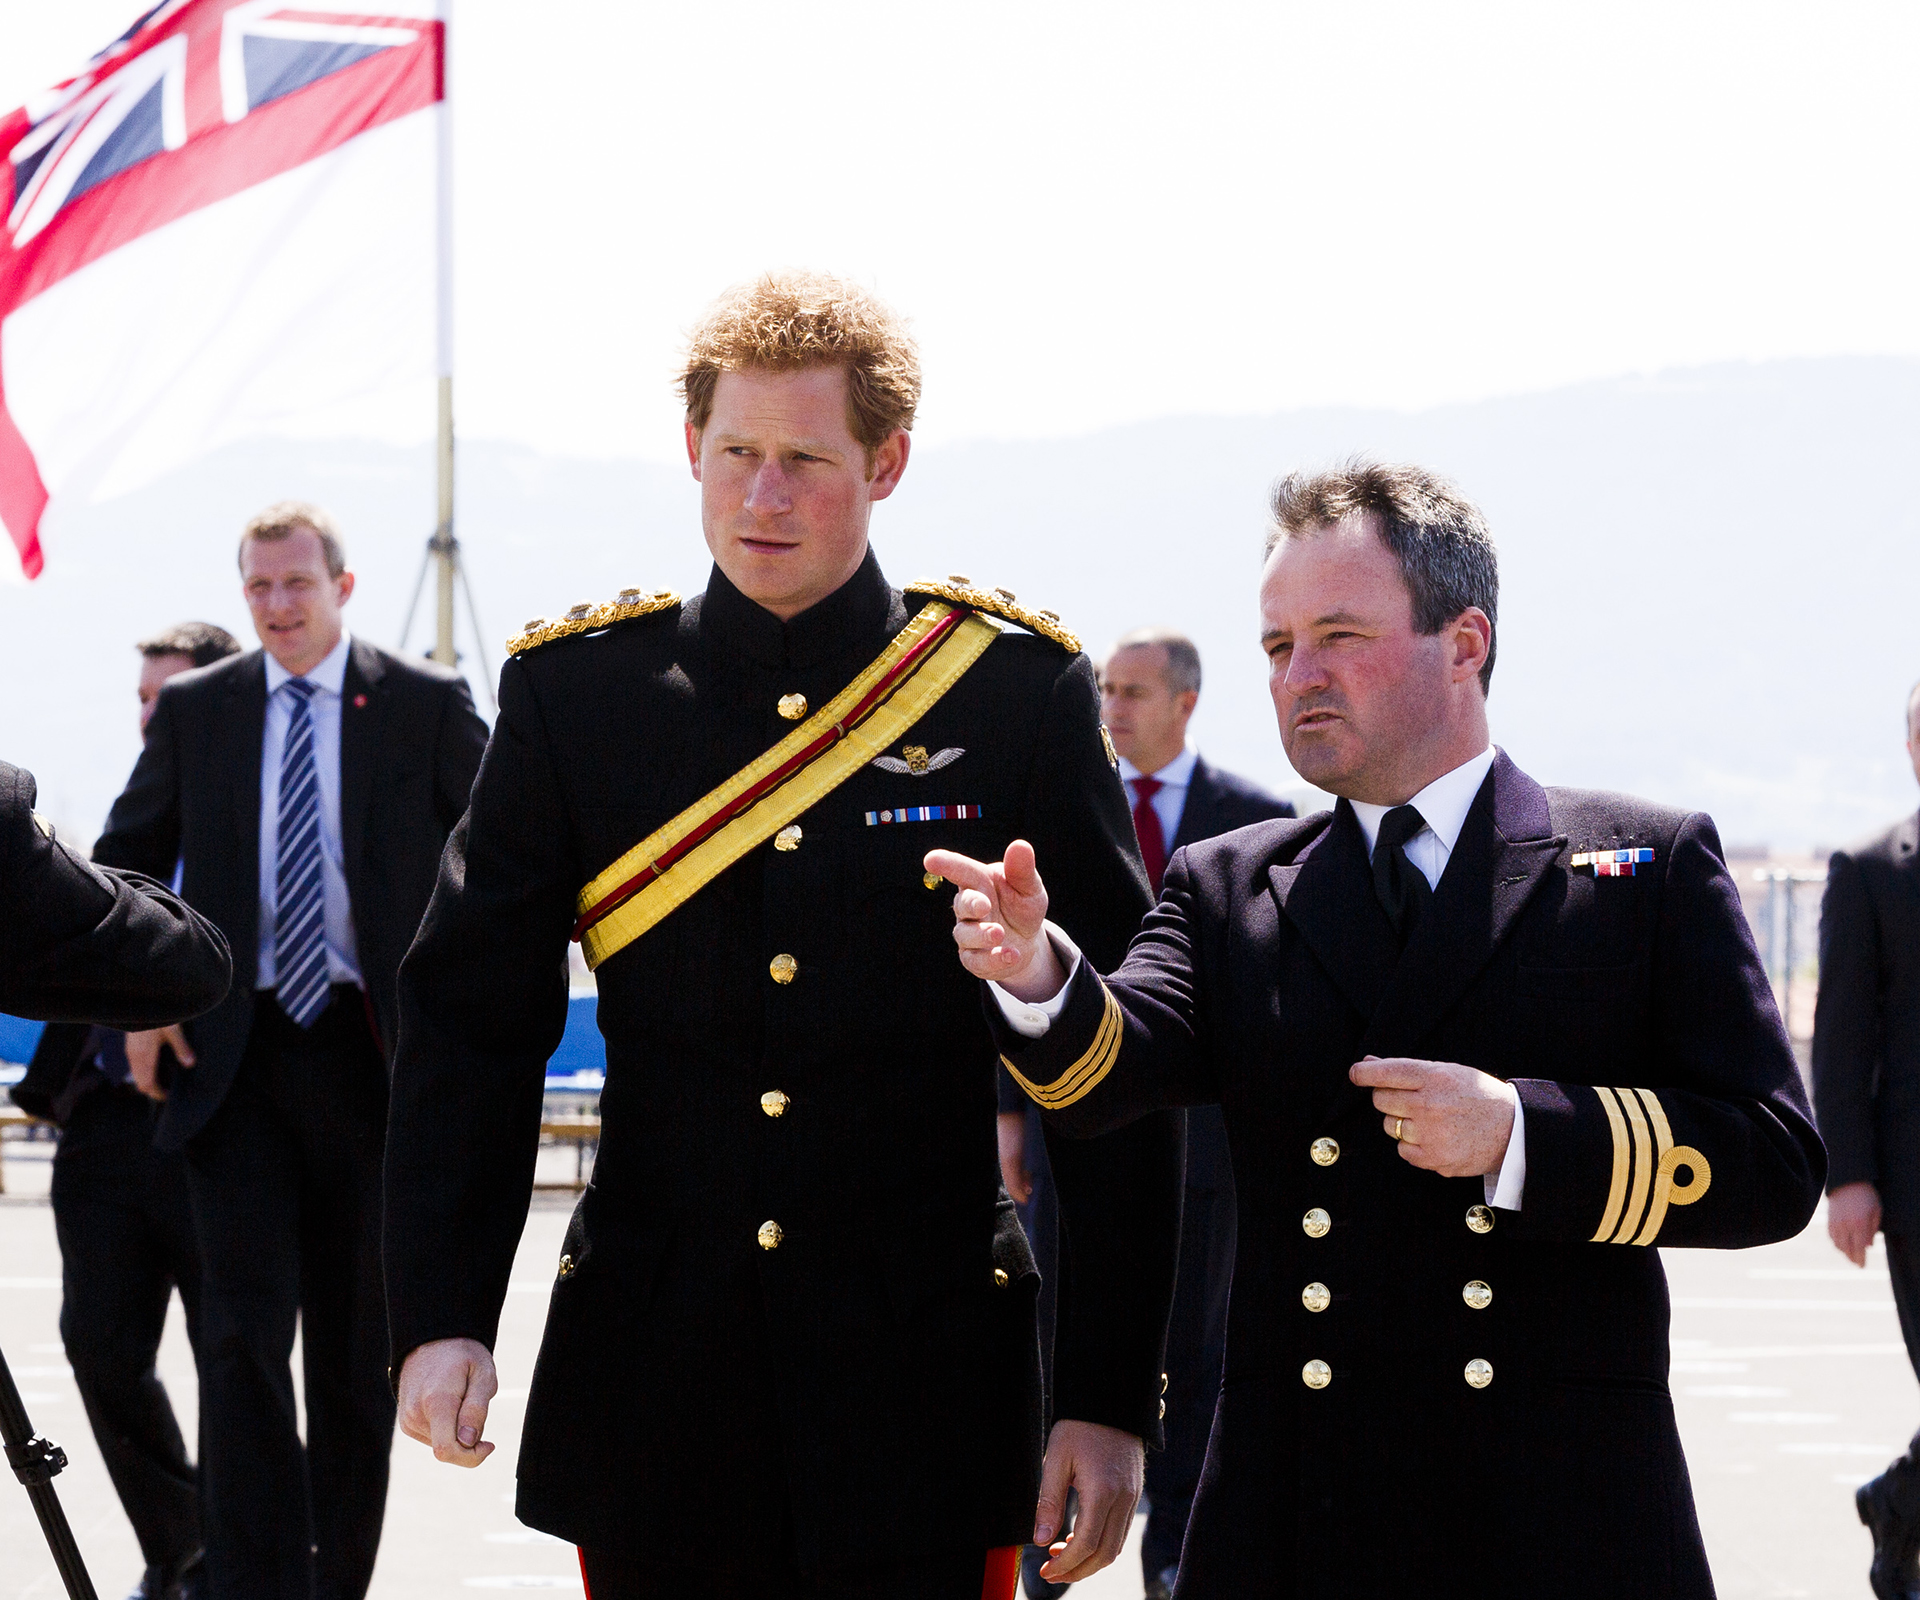 Around the world with Prince Harry